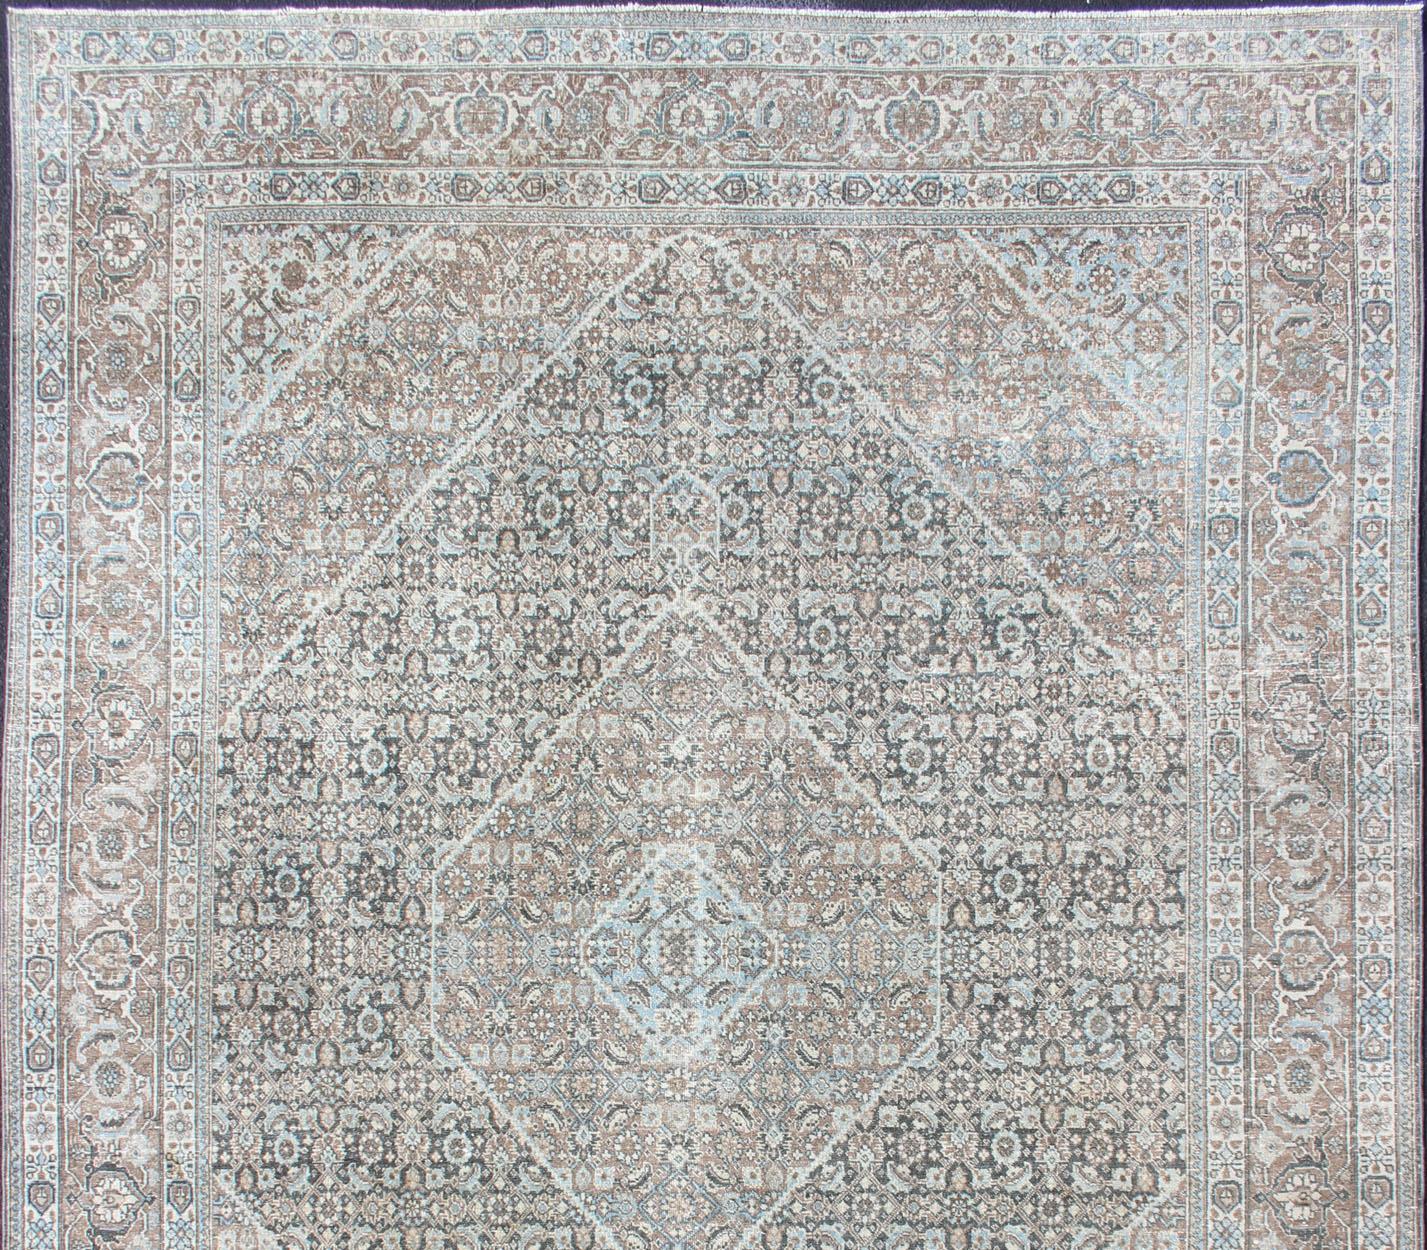 Medium Blue and Gray Background Persian Tabriz Rug with All-Over Herati Design In Good Condition For Sale In Atlanta, GA